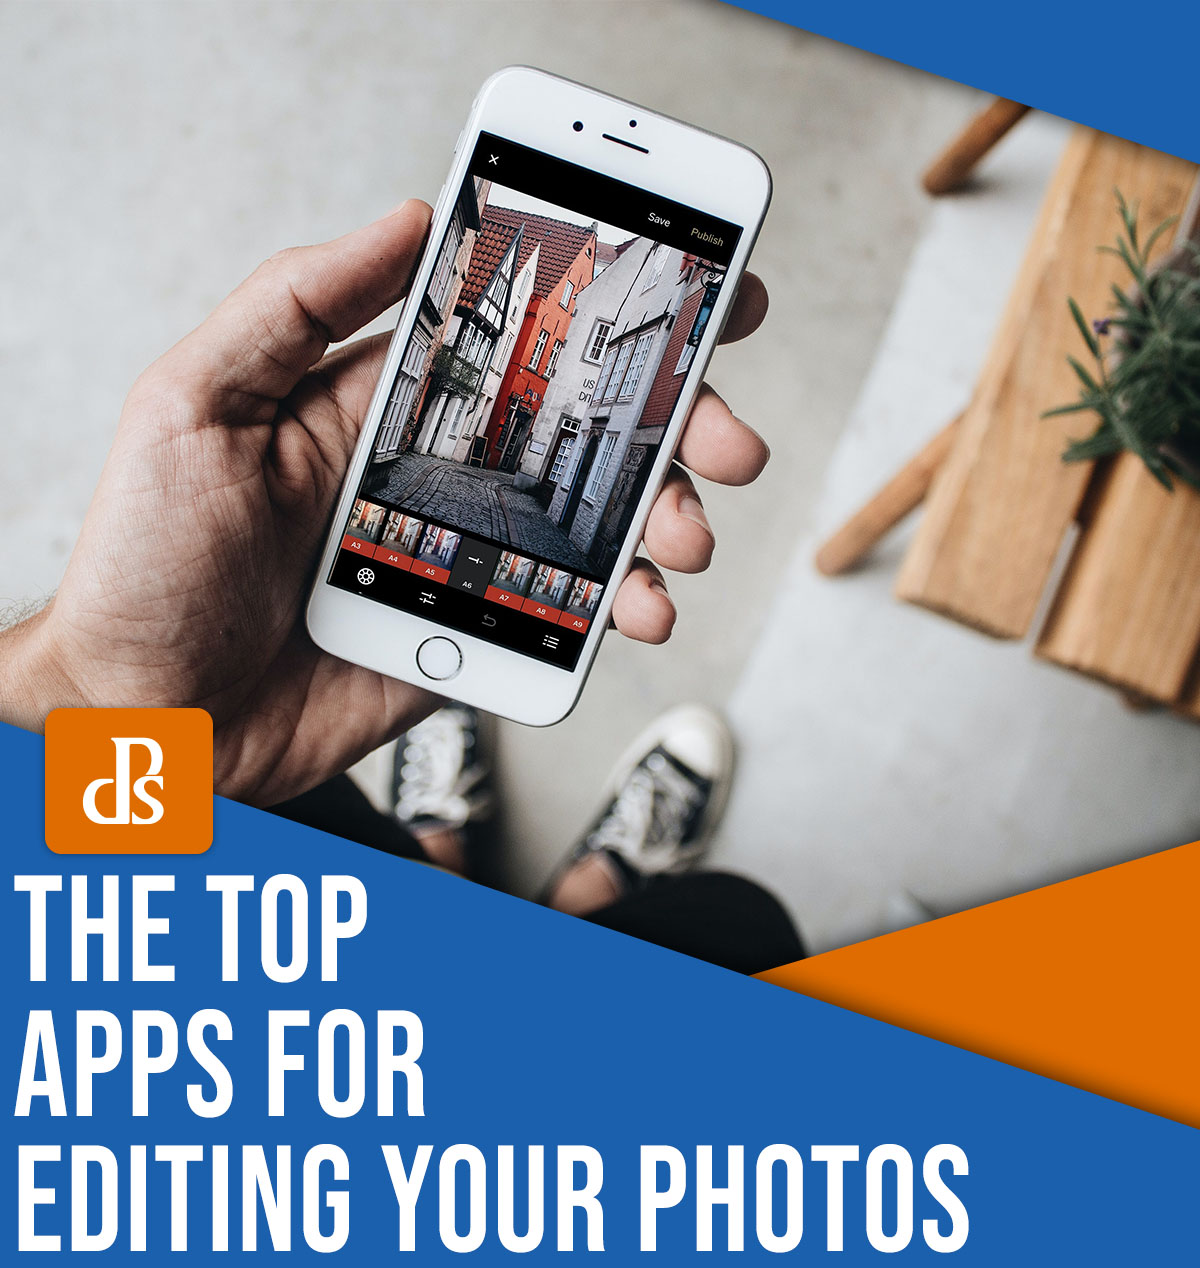 The top apps for editing your photos